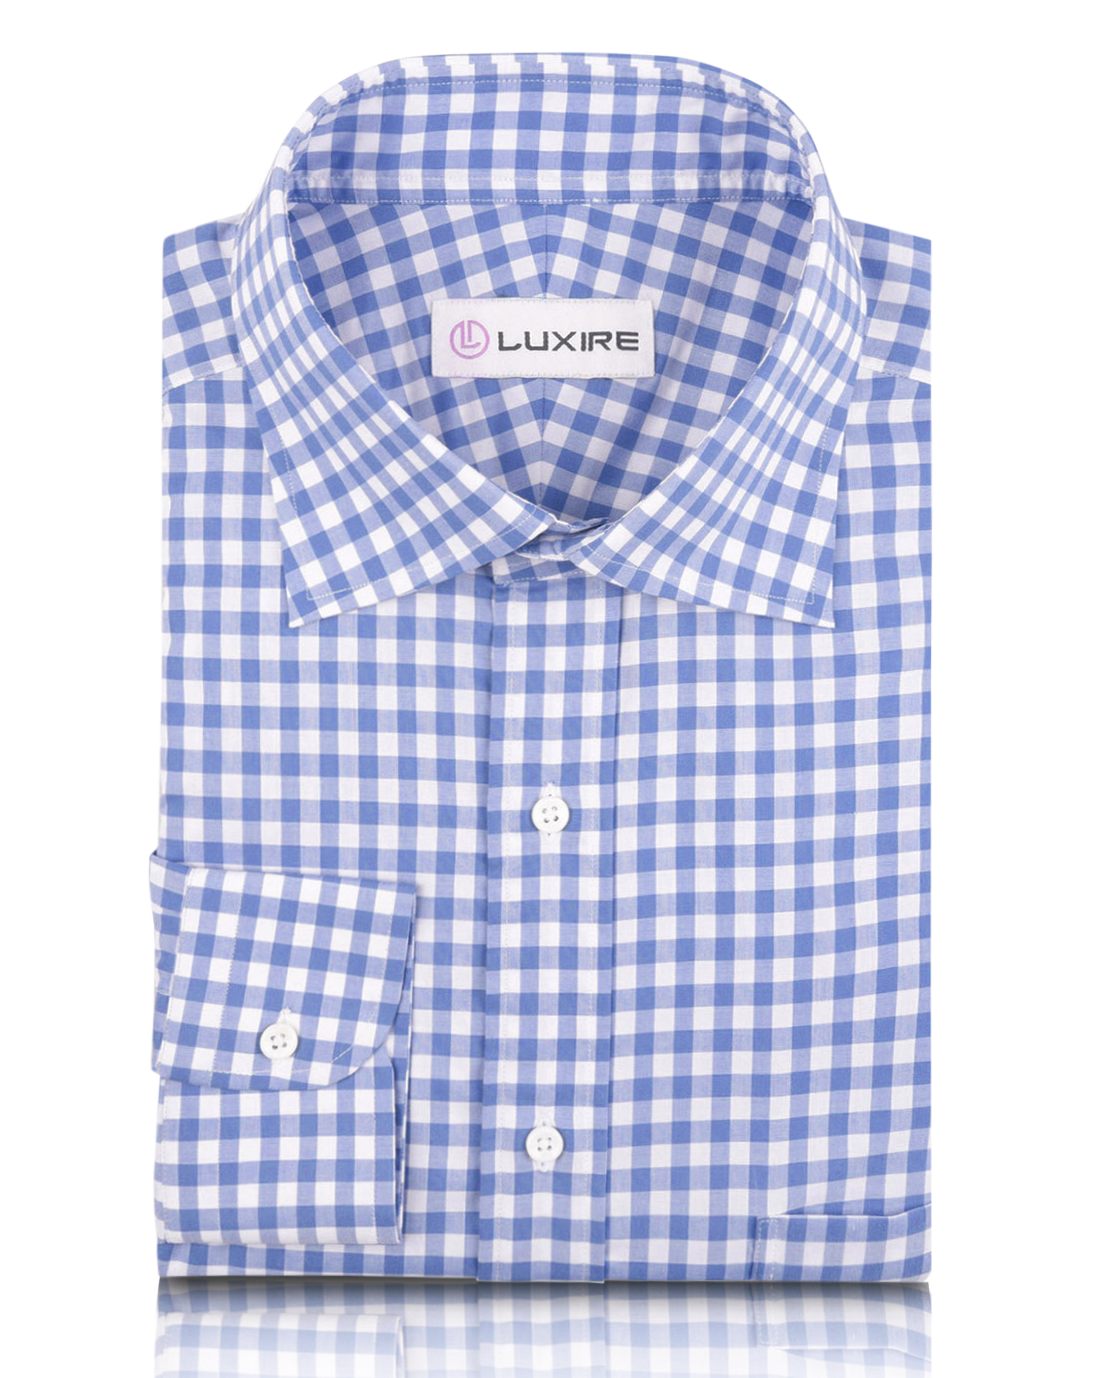 Front view of custom check shirts for men by Luxire light blue checks on white